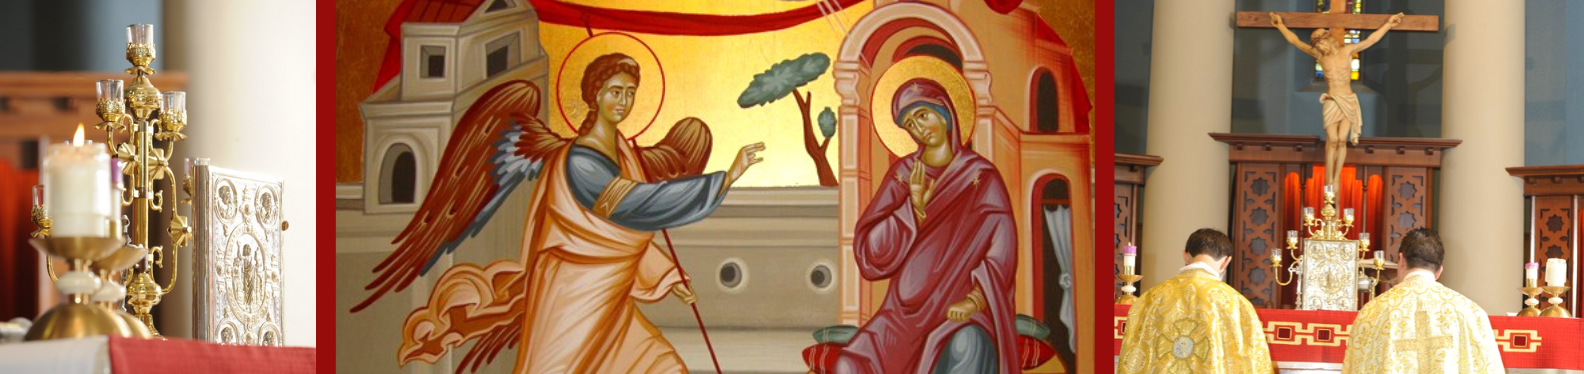 Banner for Byzantine RC Mission with Icon of Annunciation, Priests at Mass and Gospel on altar